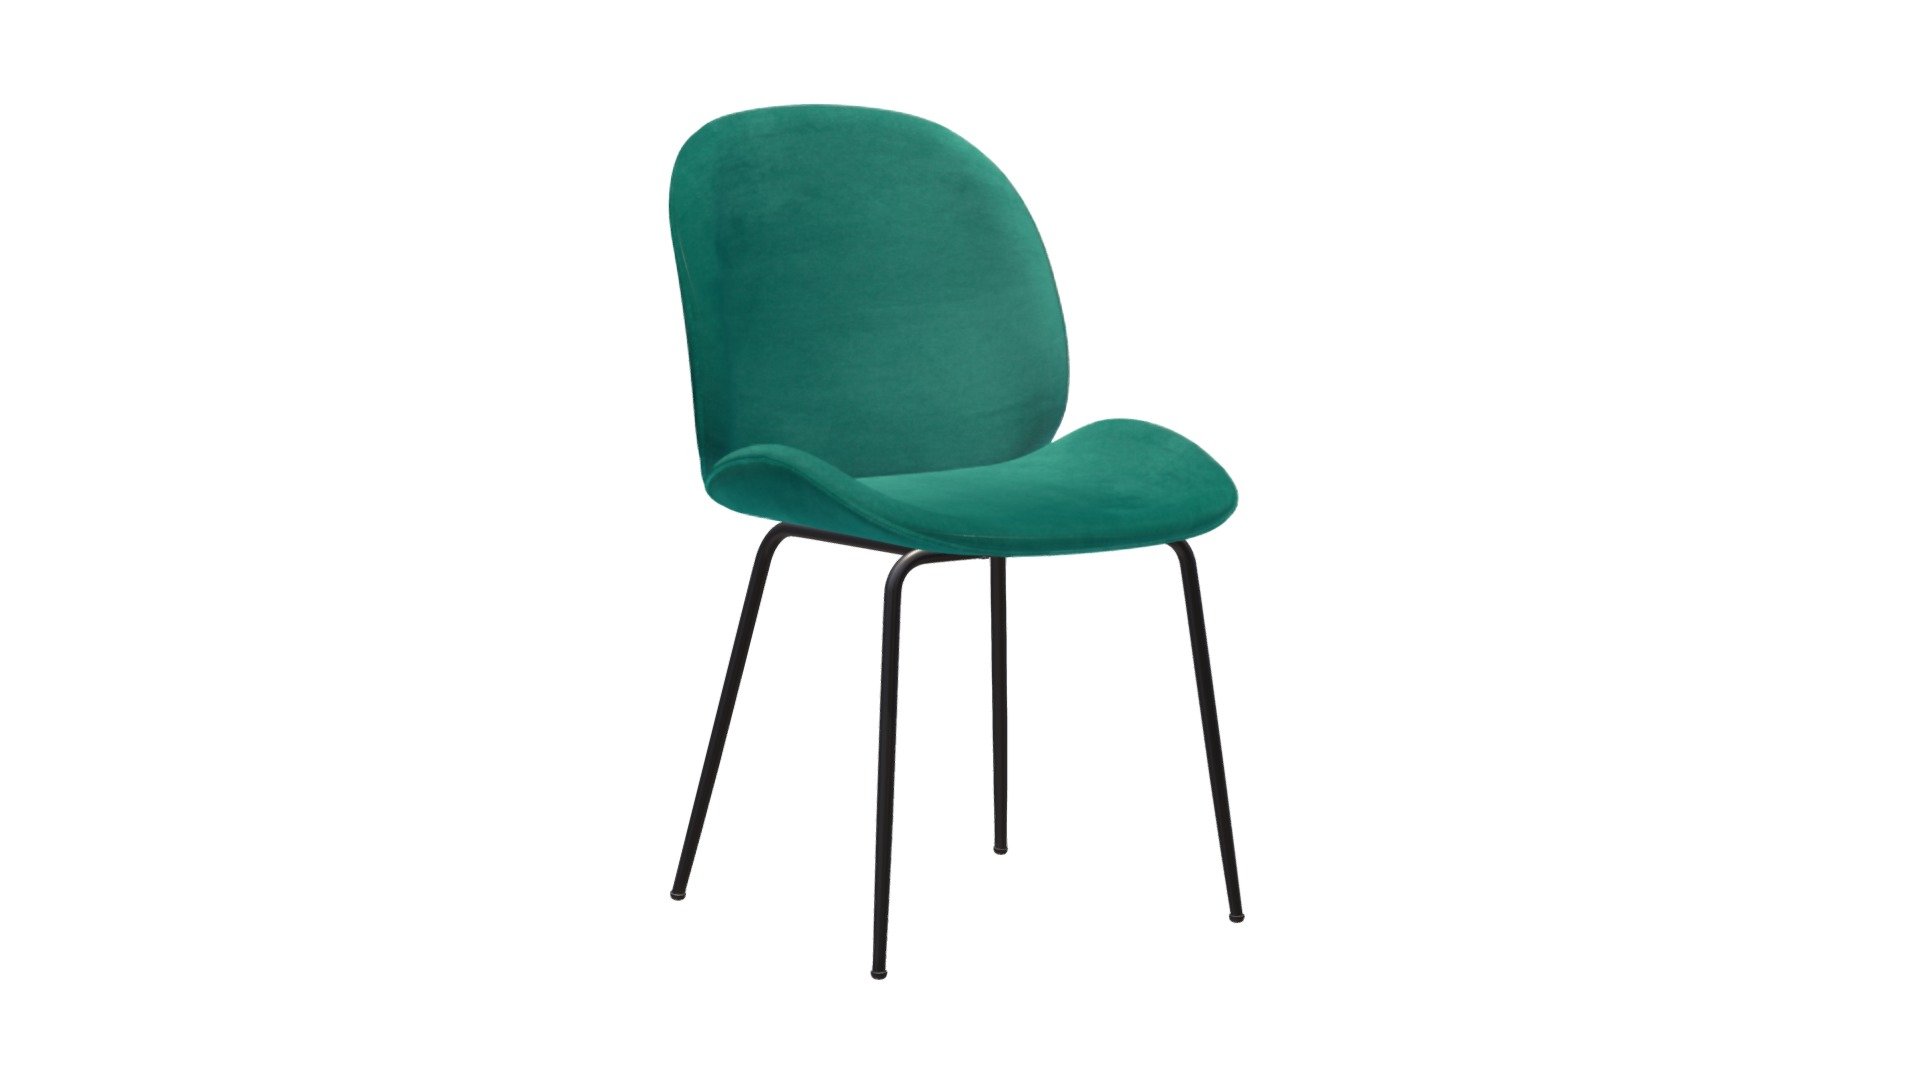 https://zuomod.com/miles-dining-chair-green

The Miles Bar Chair has glam and maximalist design and looks great in any space from modern to boho chic. The solid steel frame is powder coated in a matte black finish and the firm seat and back are covered in a smooth velvet polyester fabric. This bar chair fits great in any home kitchen or bar as well as any hospitality setting like a restaurant 3d model